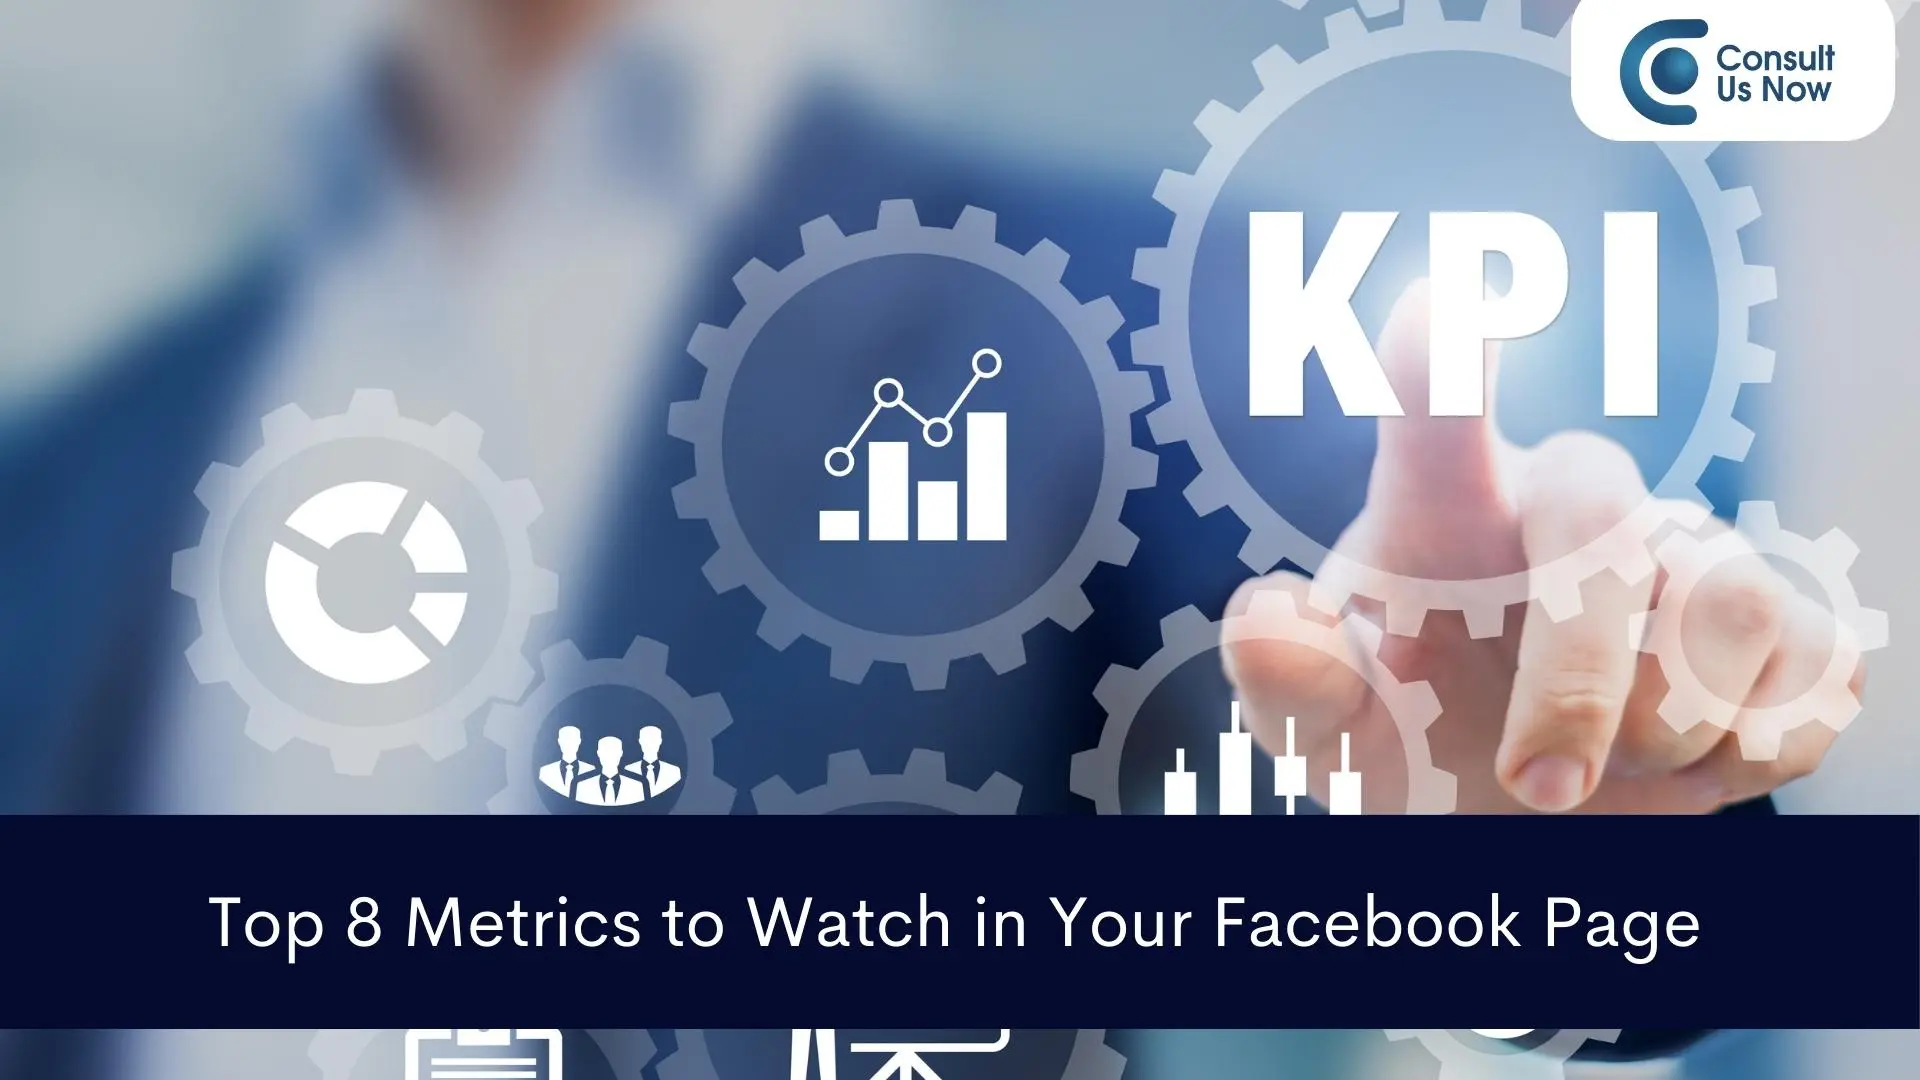 Top 8 Metrics to Watch in Your Facebook Page